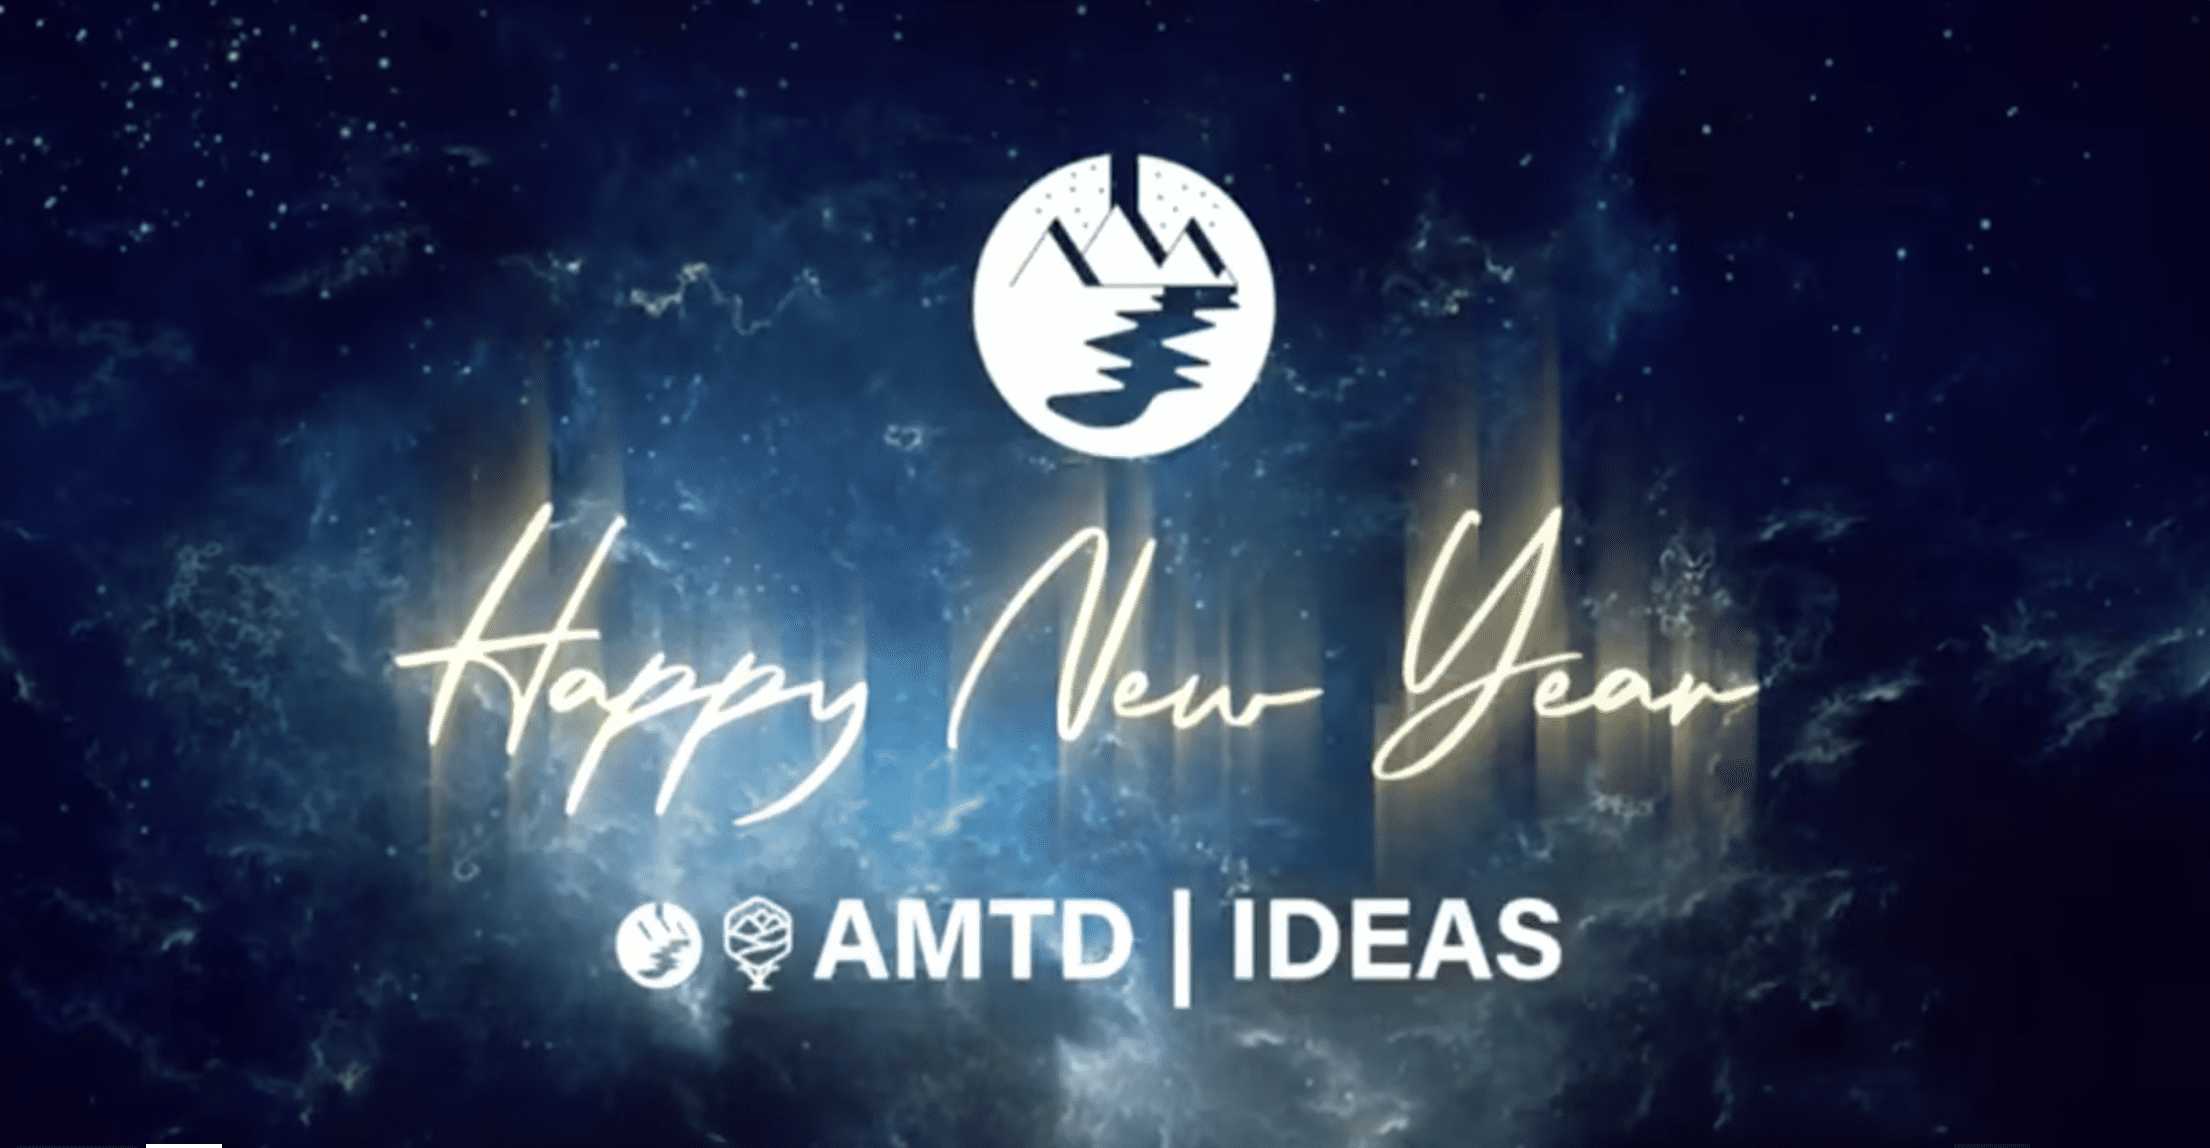 New Year’s Greeting from AMTD